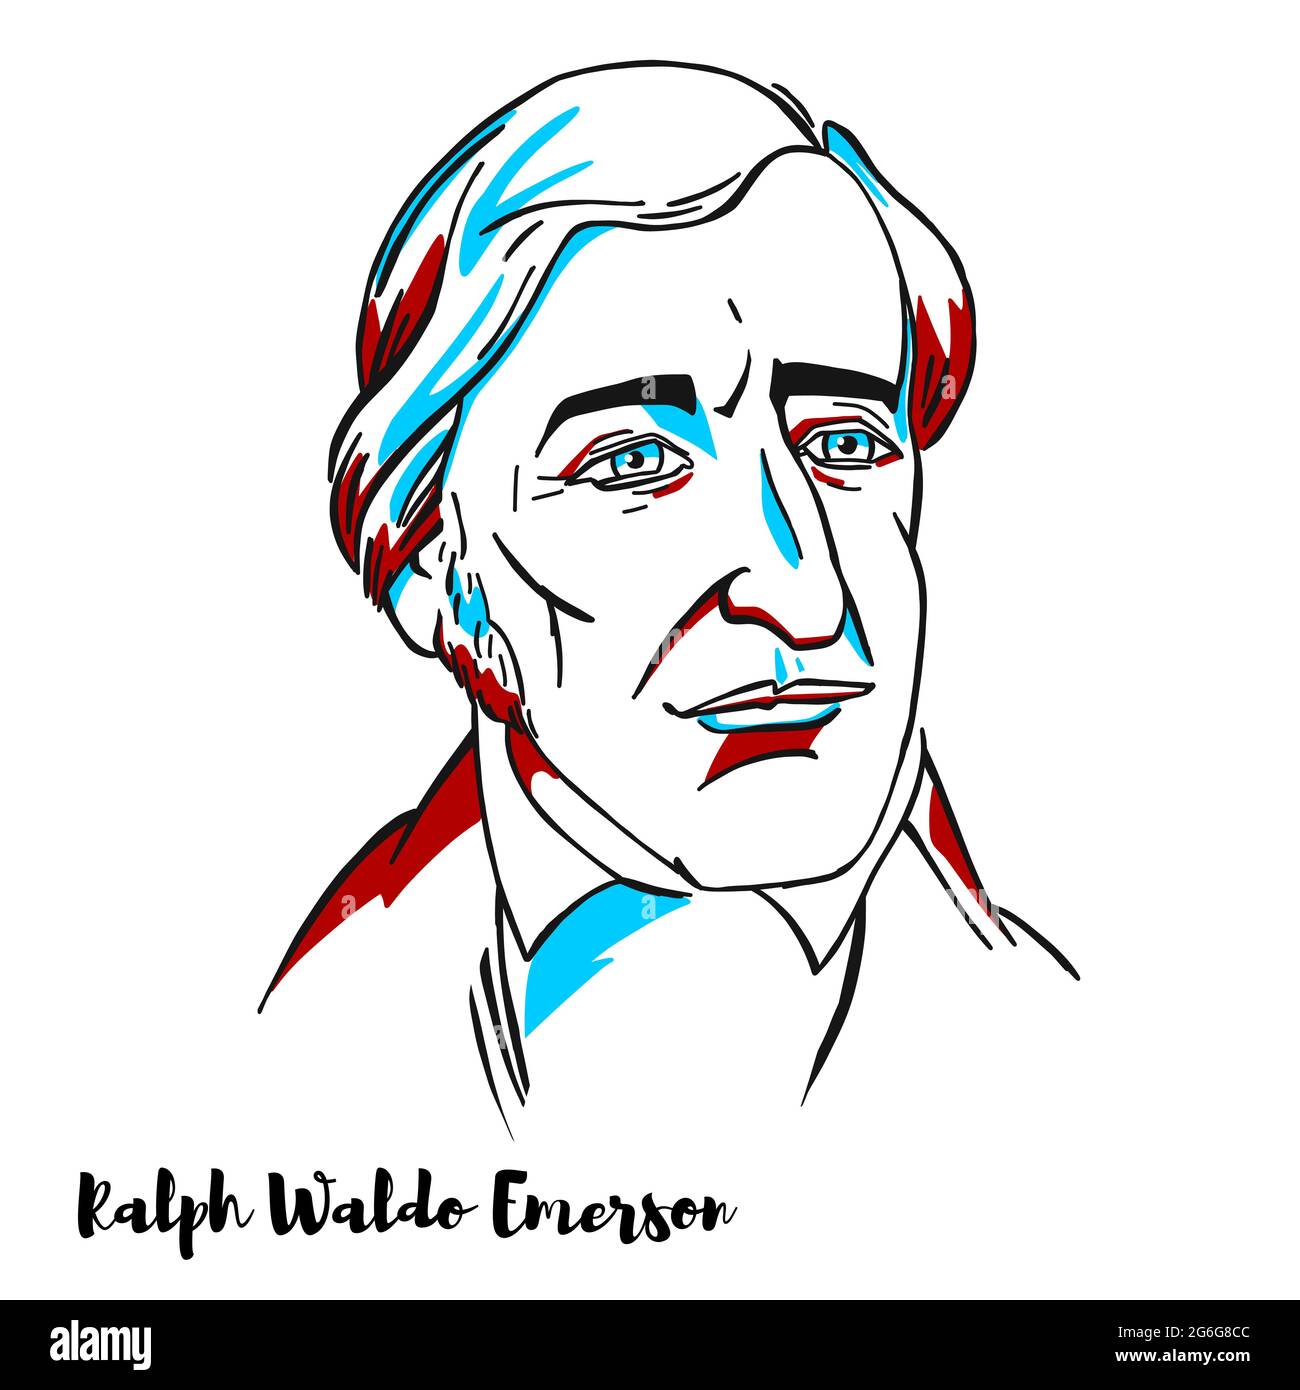 Ralph Waldo Emerson engraved vector portrait with ink contours. American essayist, lecturer, philosopher, and poet who led the transcendentalist movem Stock Vector